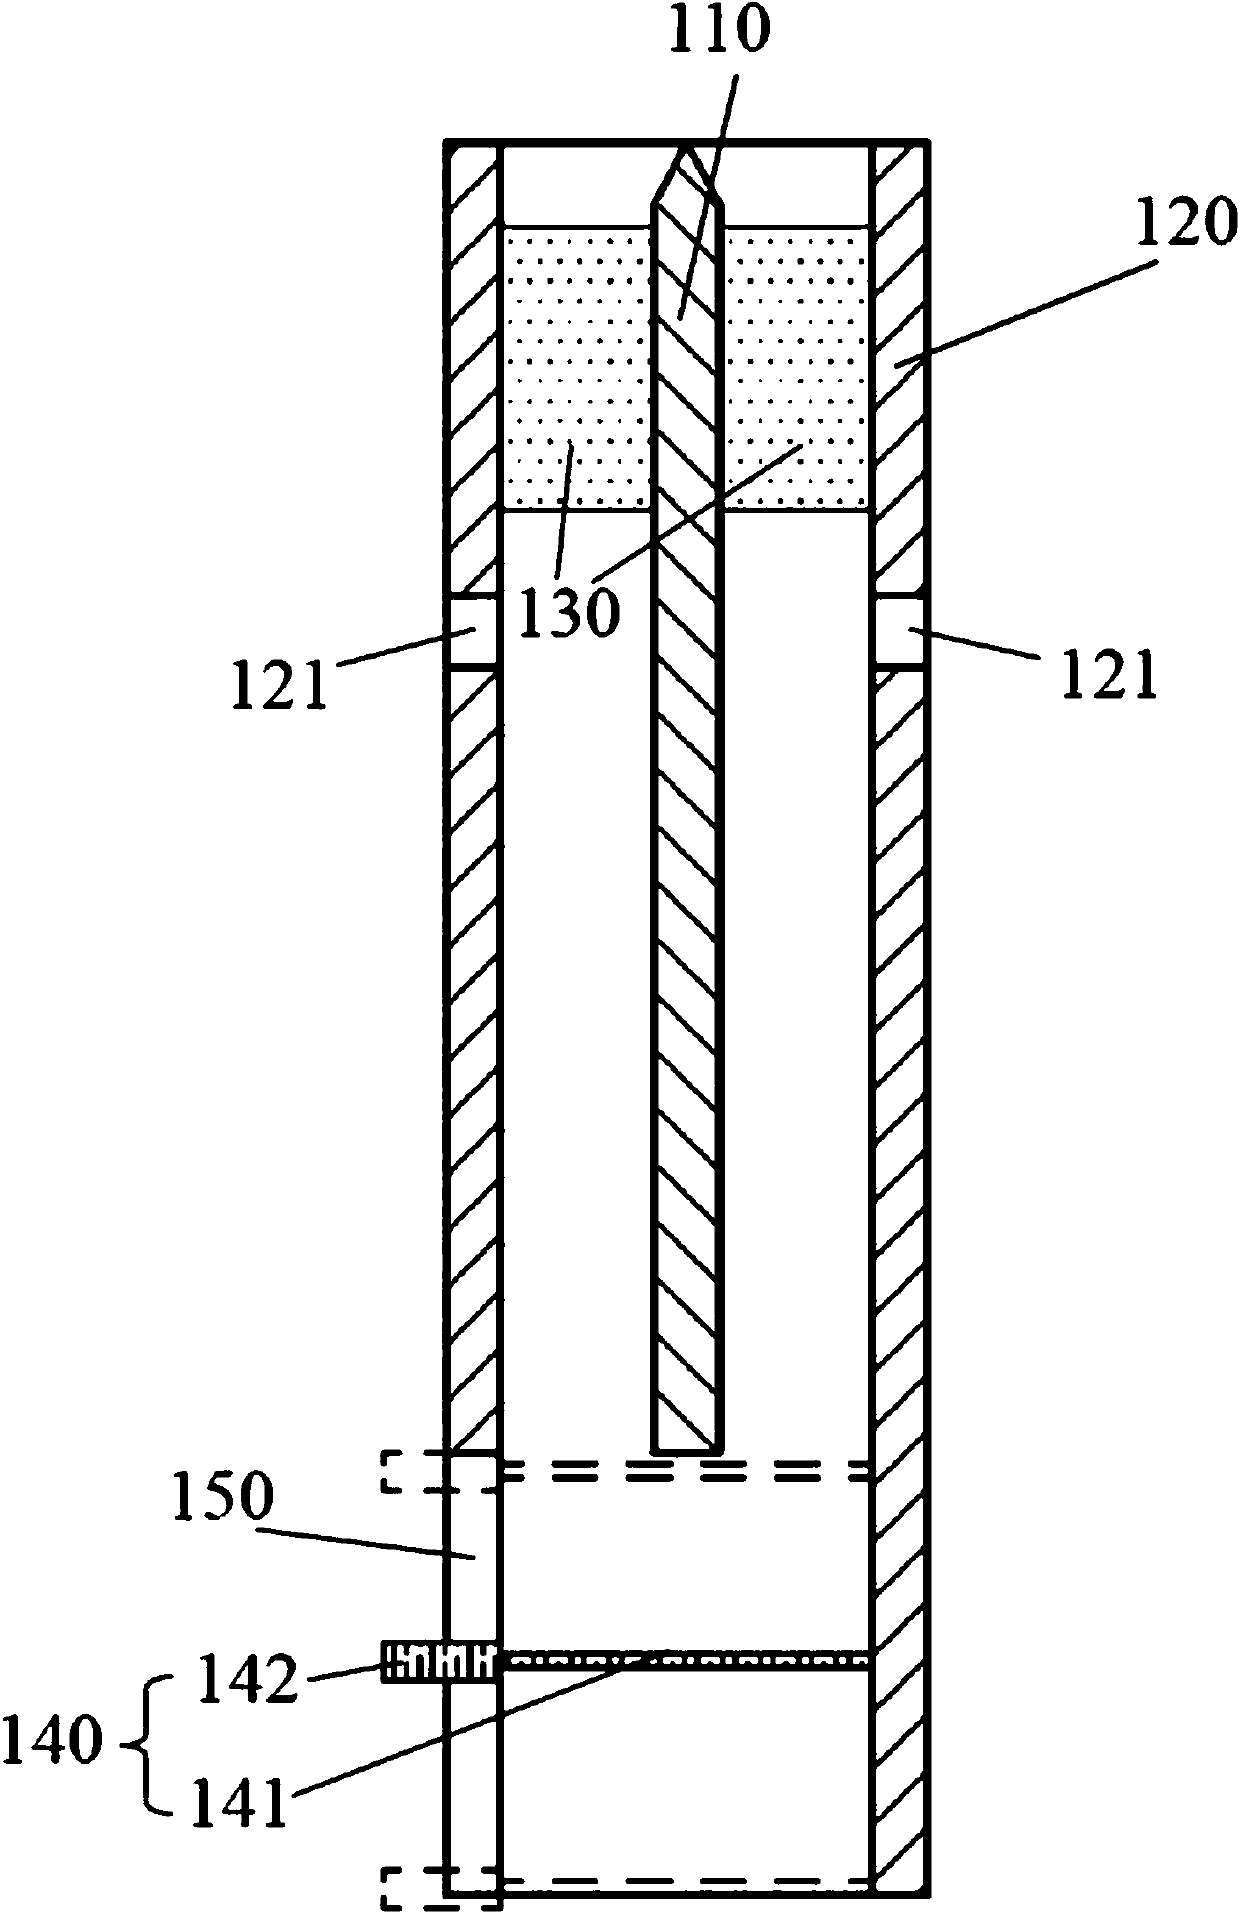 A device for generating a plasma jet